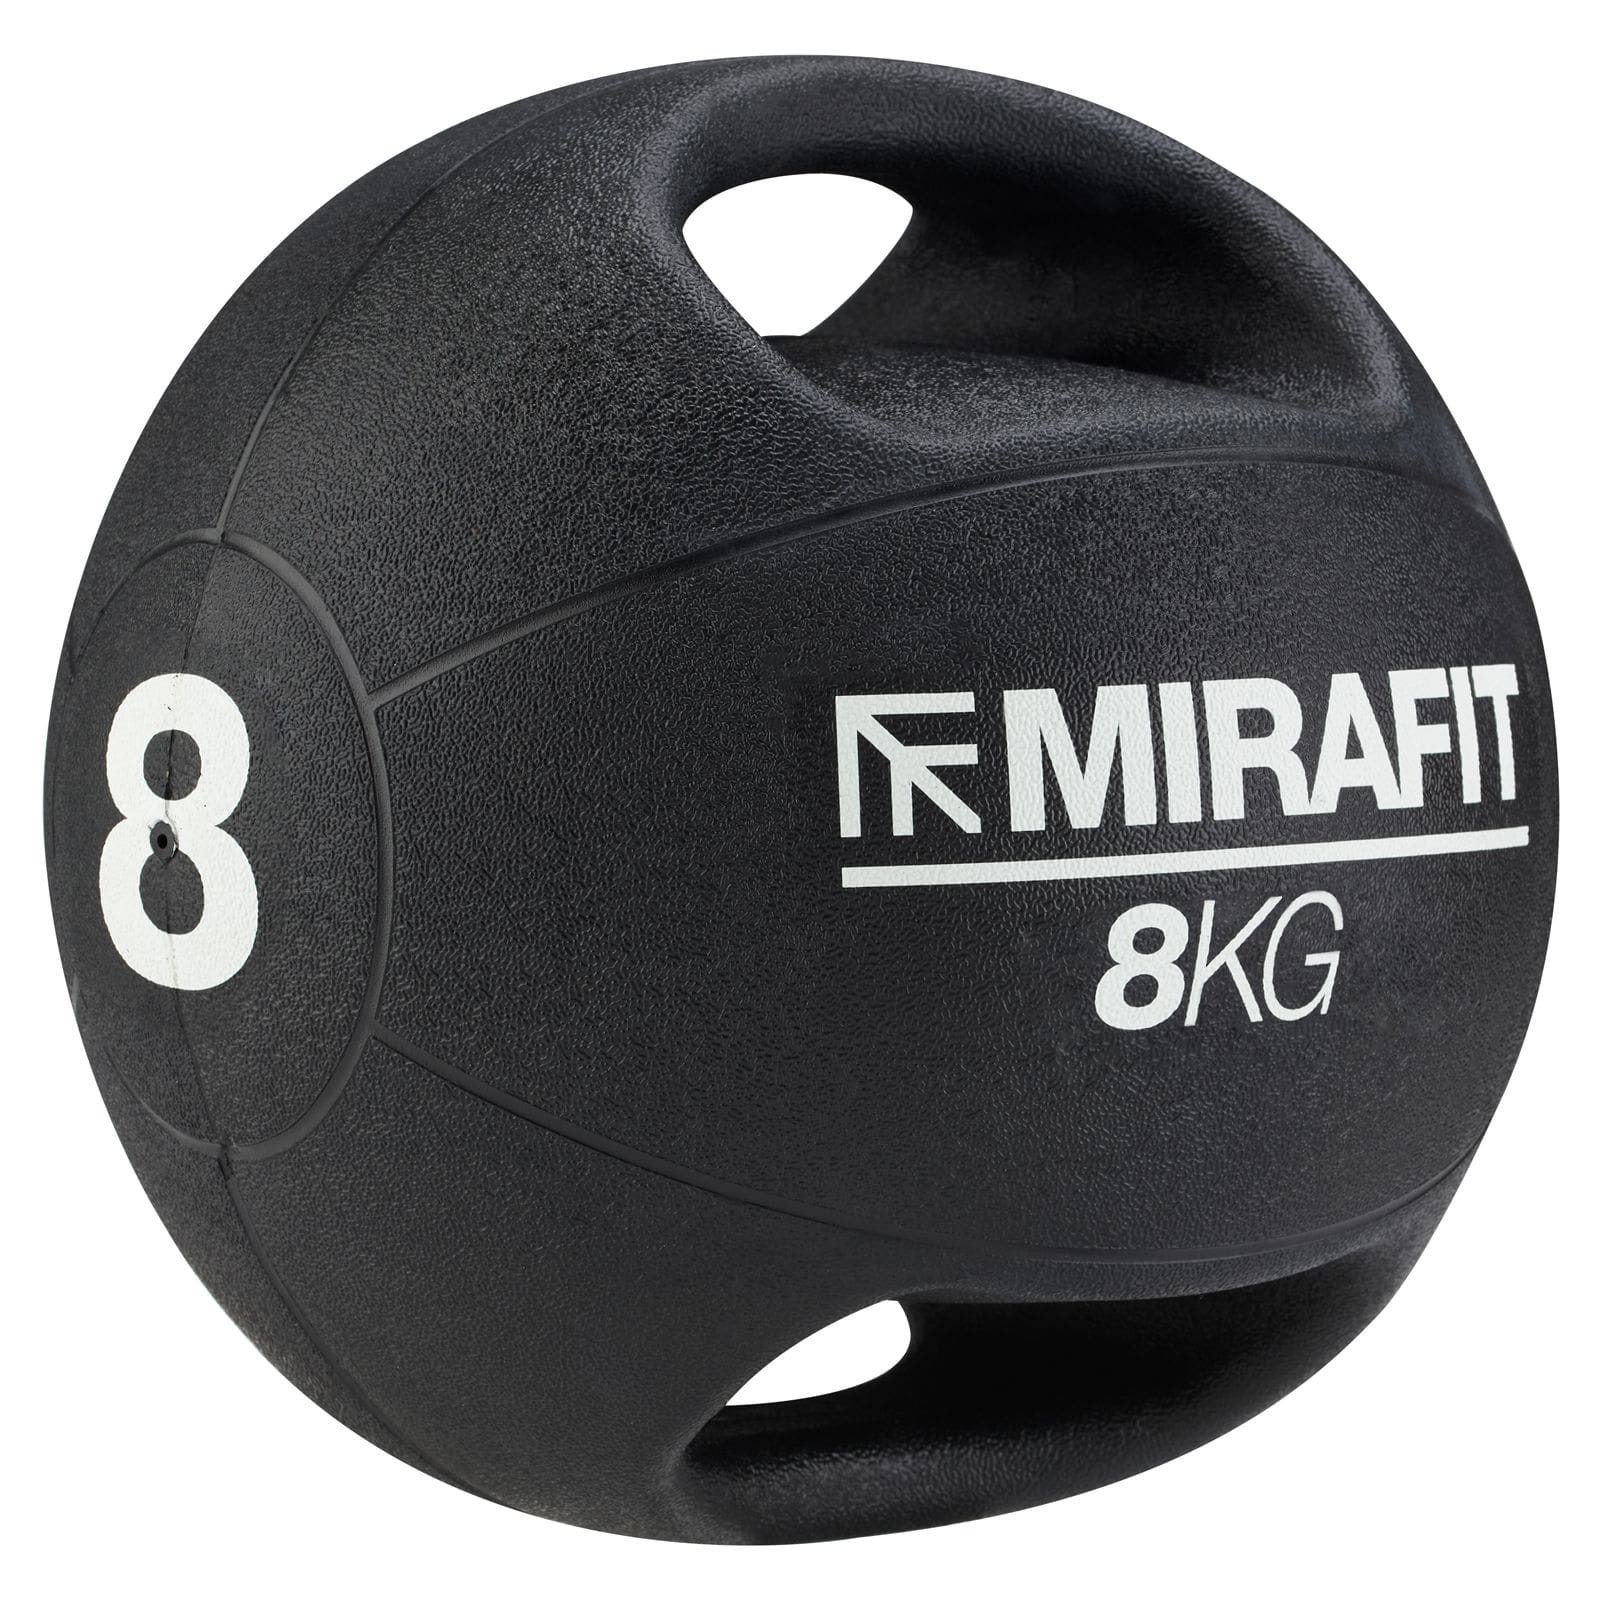 Weights of the Mirafit medicine ball with handles 8kg review